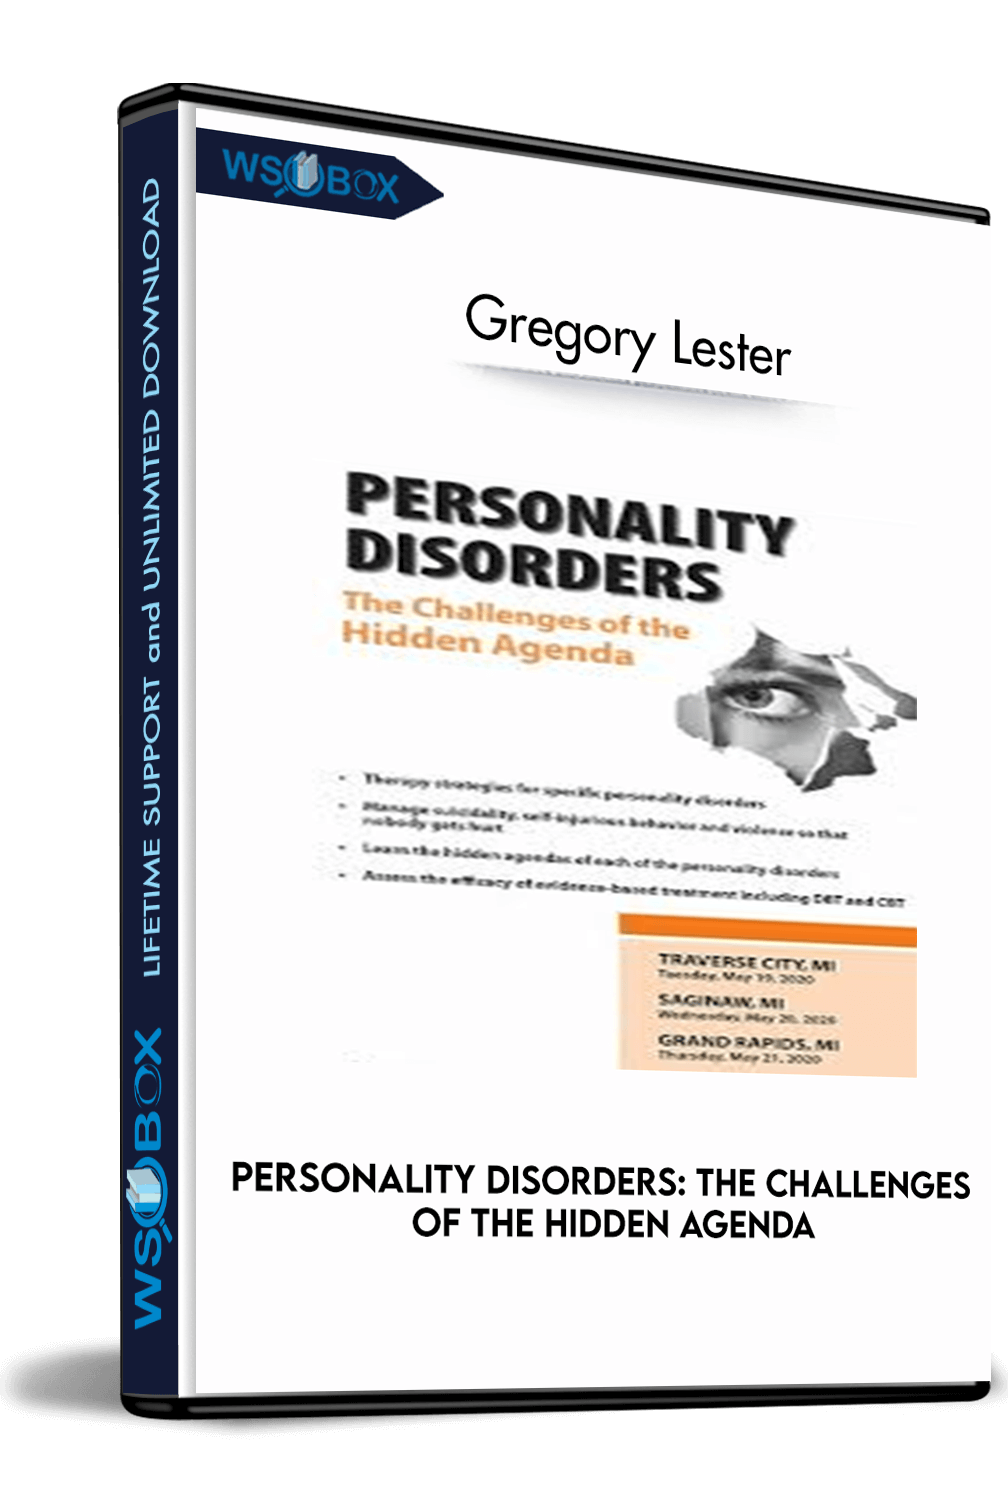 Personality Disorders: The Challenges of the Hidden Agenda – Gregory Lester